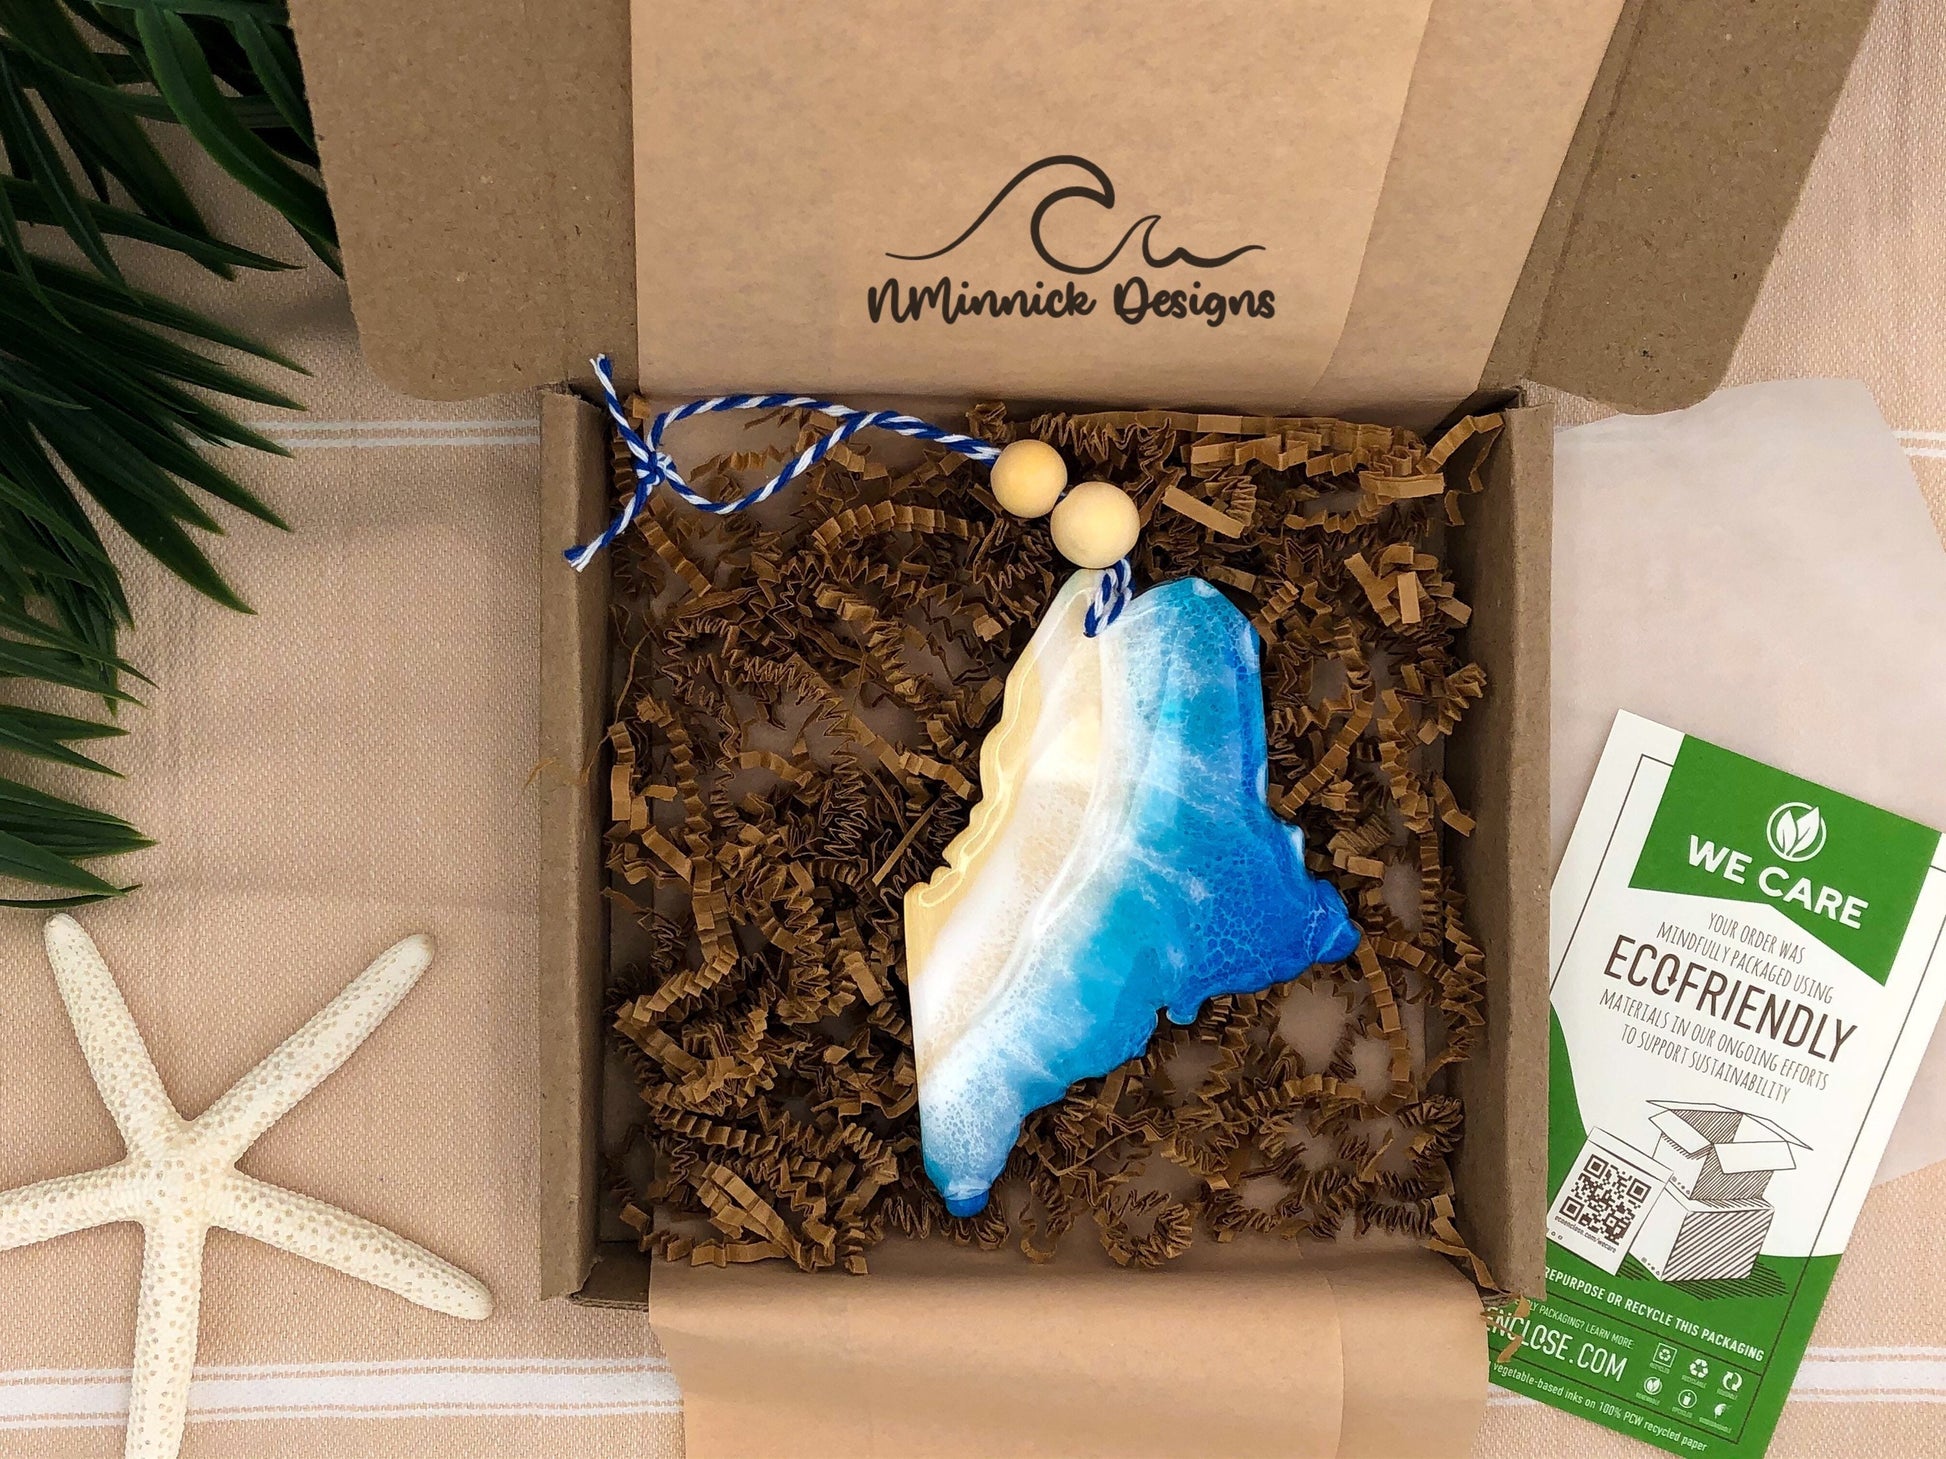 Maine beach ornament packaged in ecofriendly plastic free materials with recyclable box, tissue paper and paper shred.